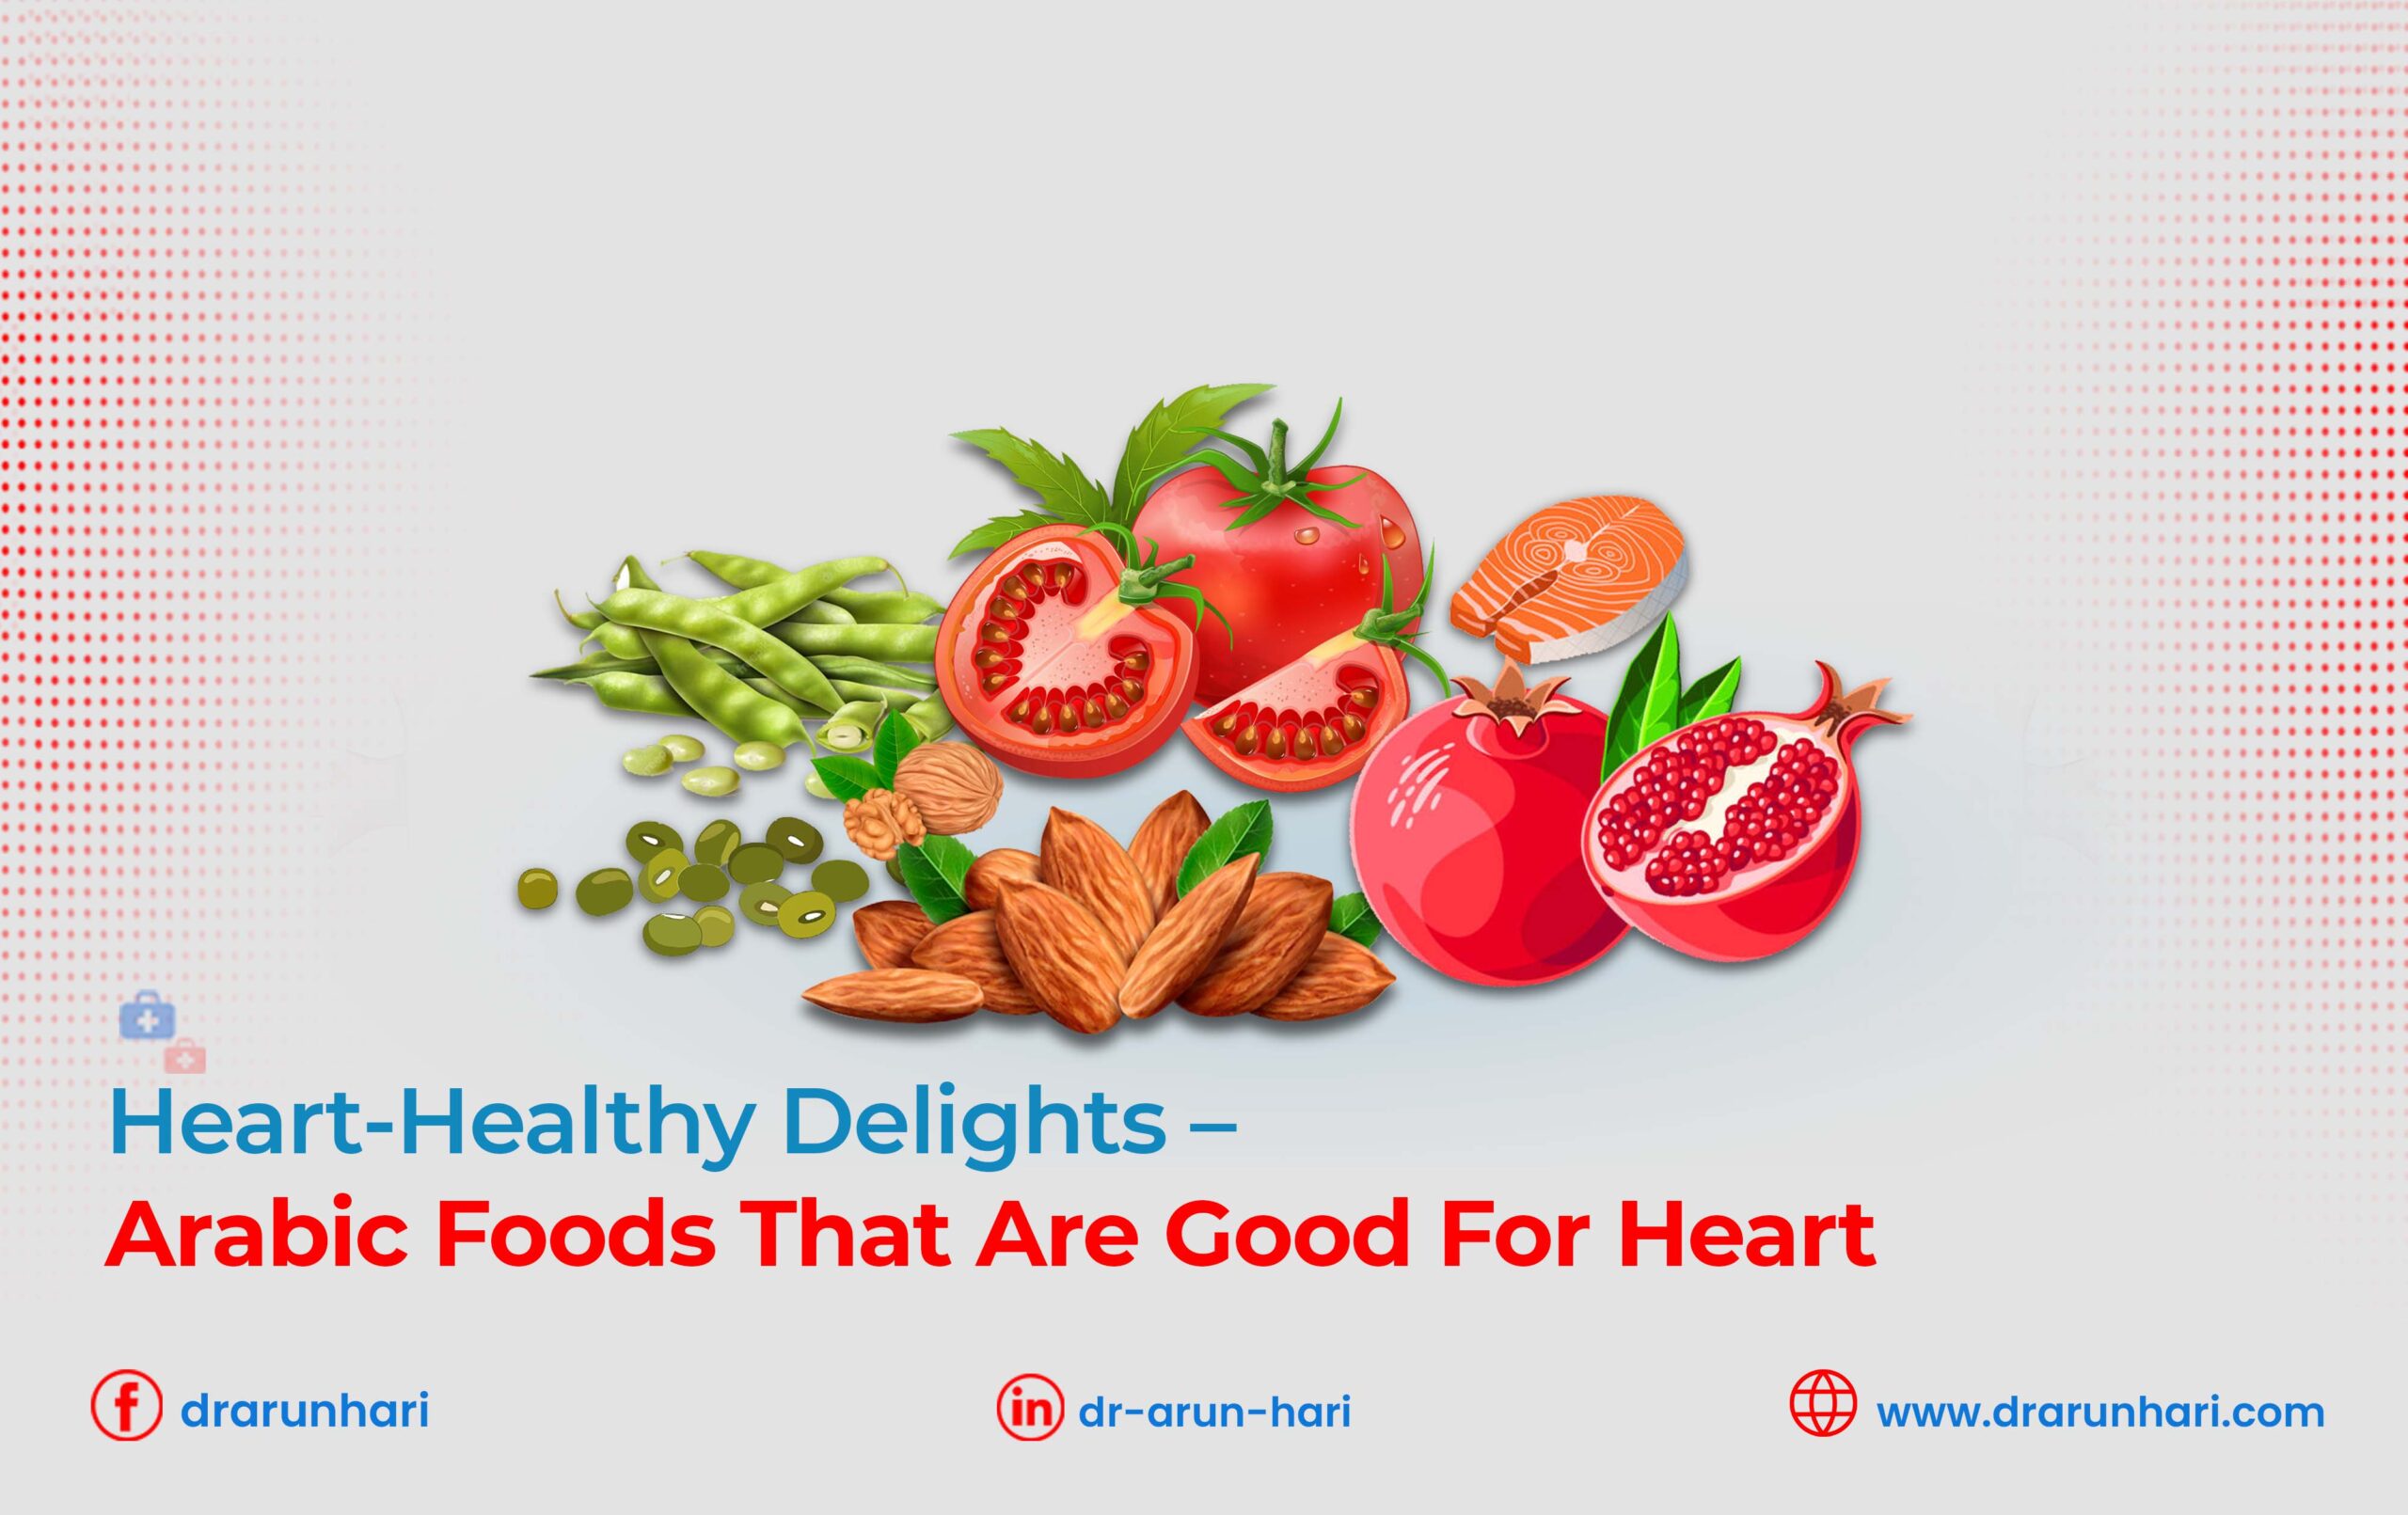 You are currently viewing Arabic Foods That Are Good for the Heart: Heart-Healthy Delights